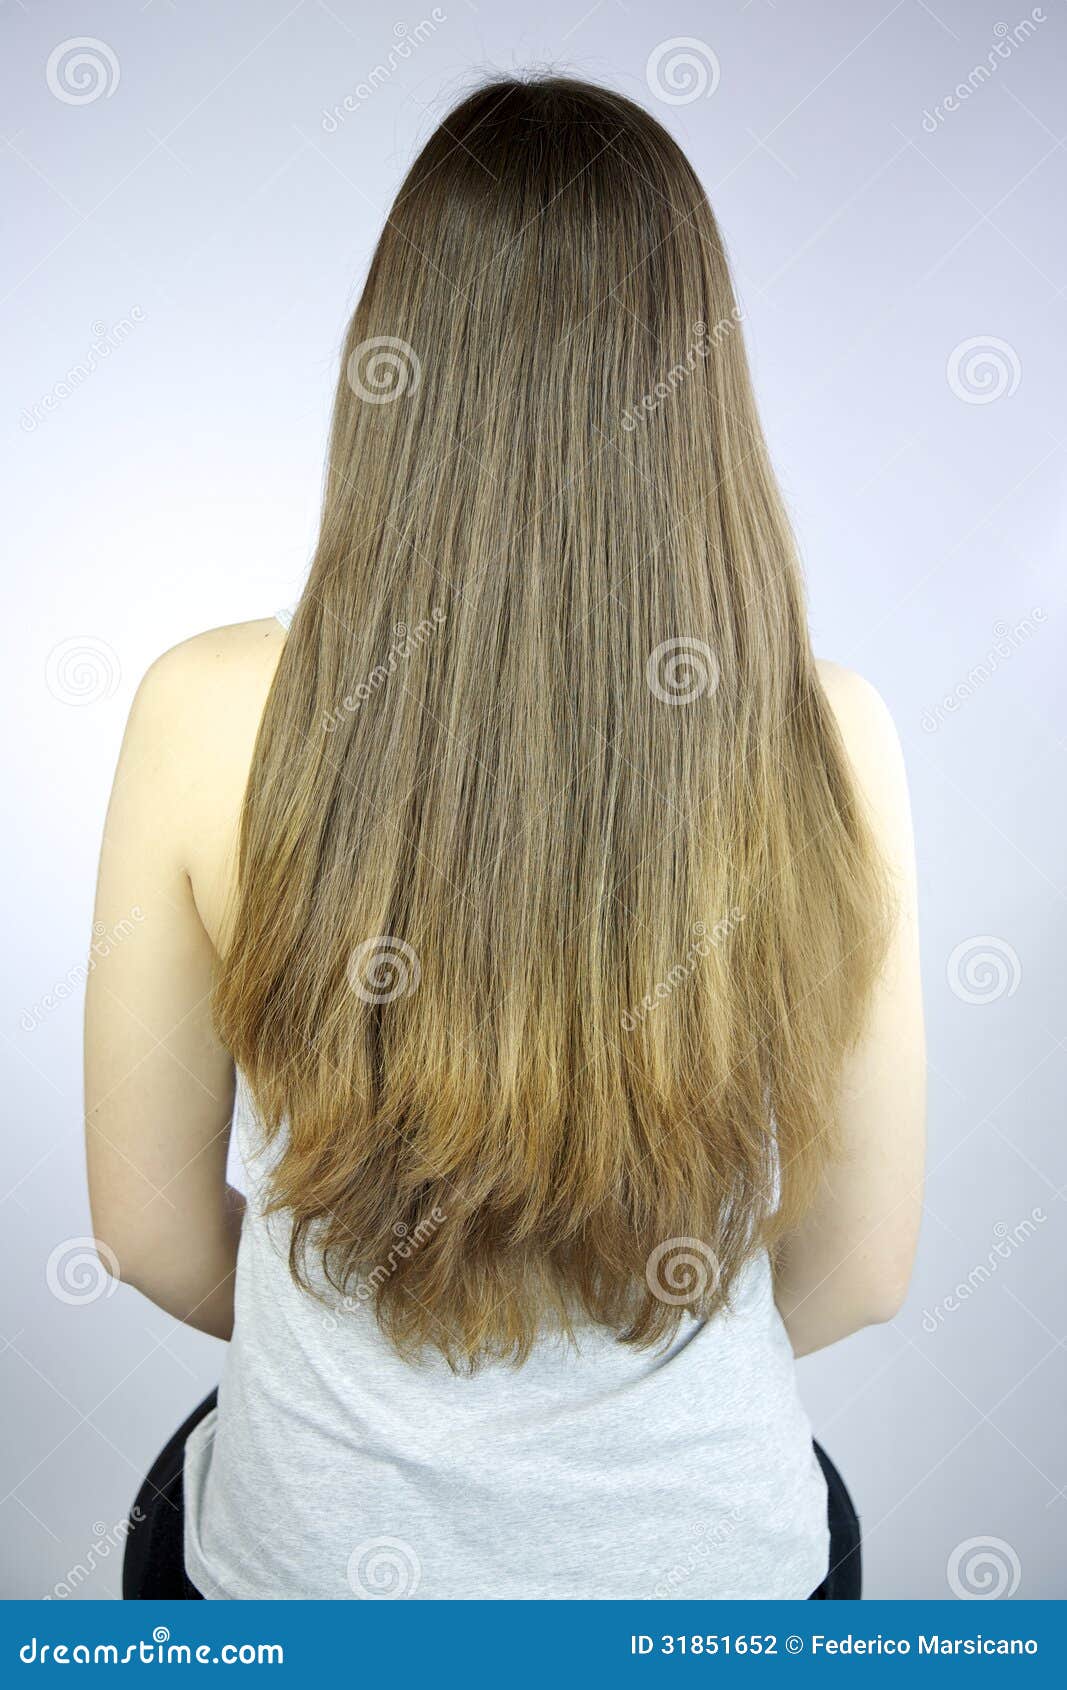 Beautiful Long Hair Freshly Cut in Layers Stock Photo - Image of hairstyle,  shiny: 31851652